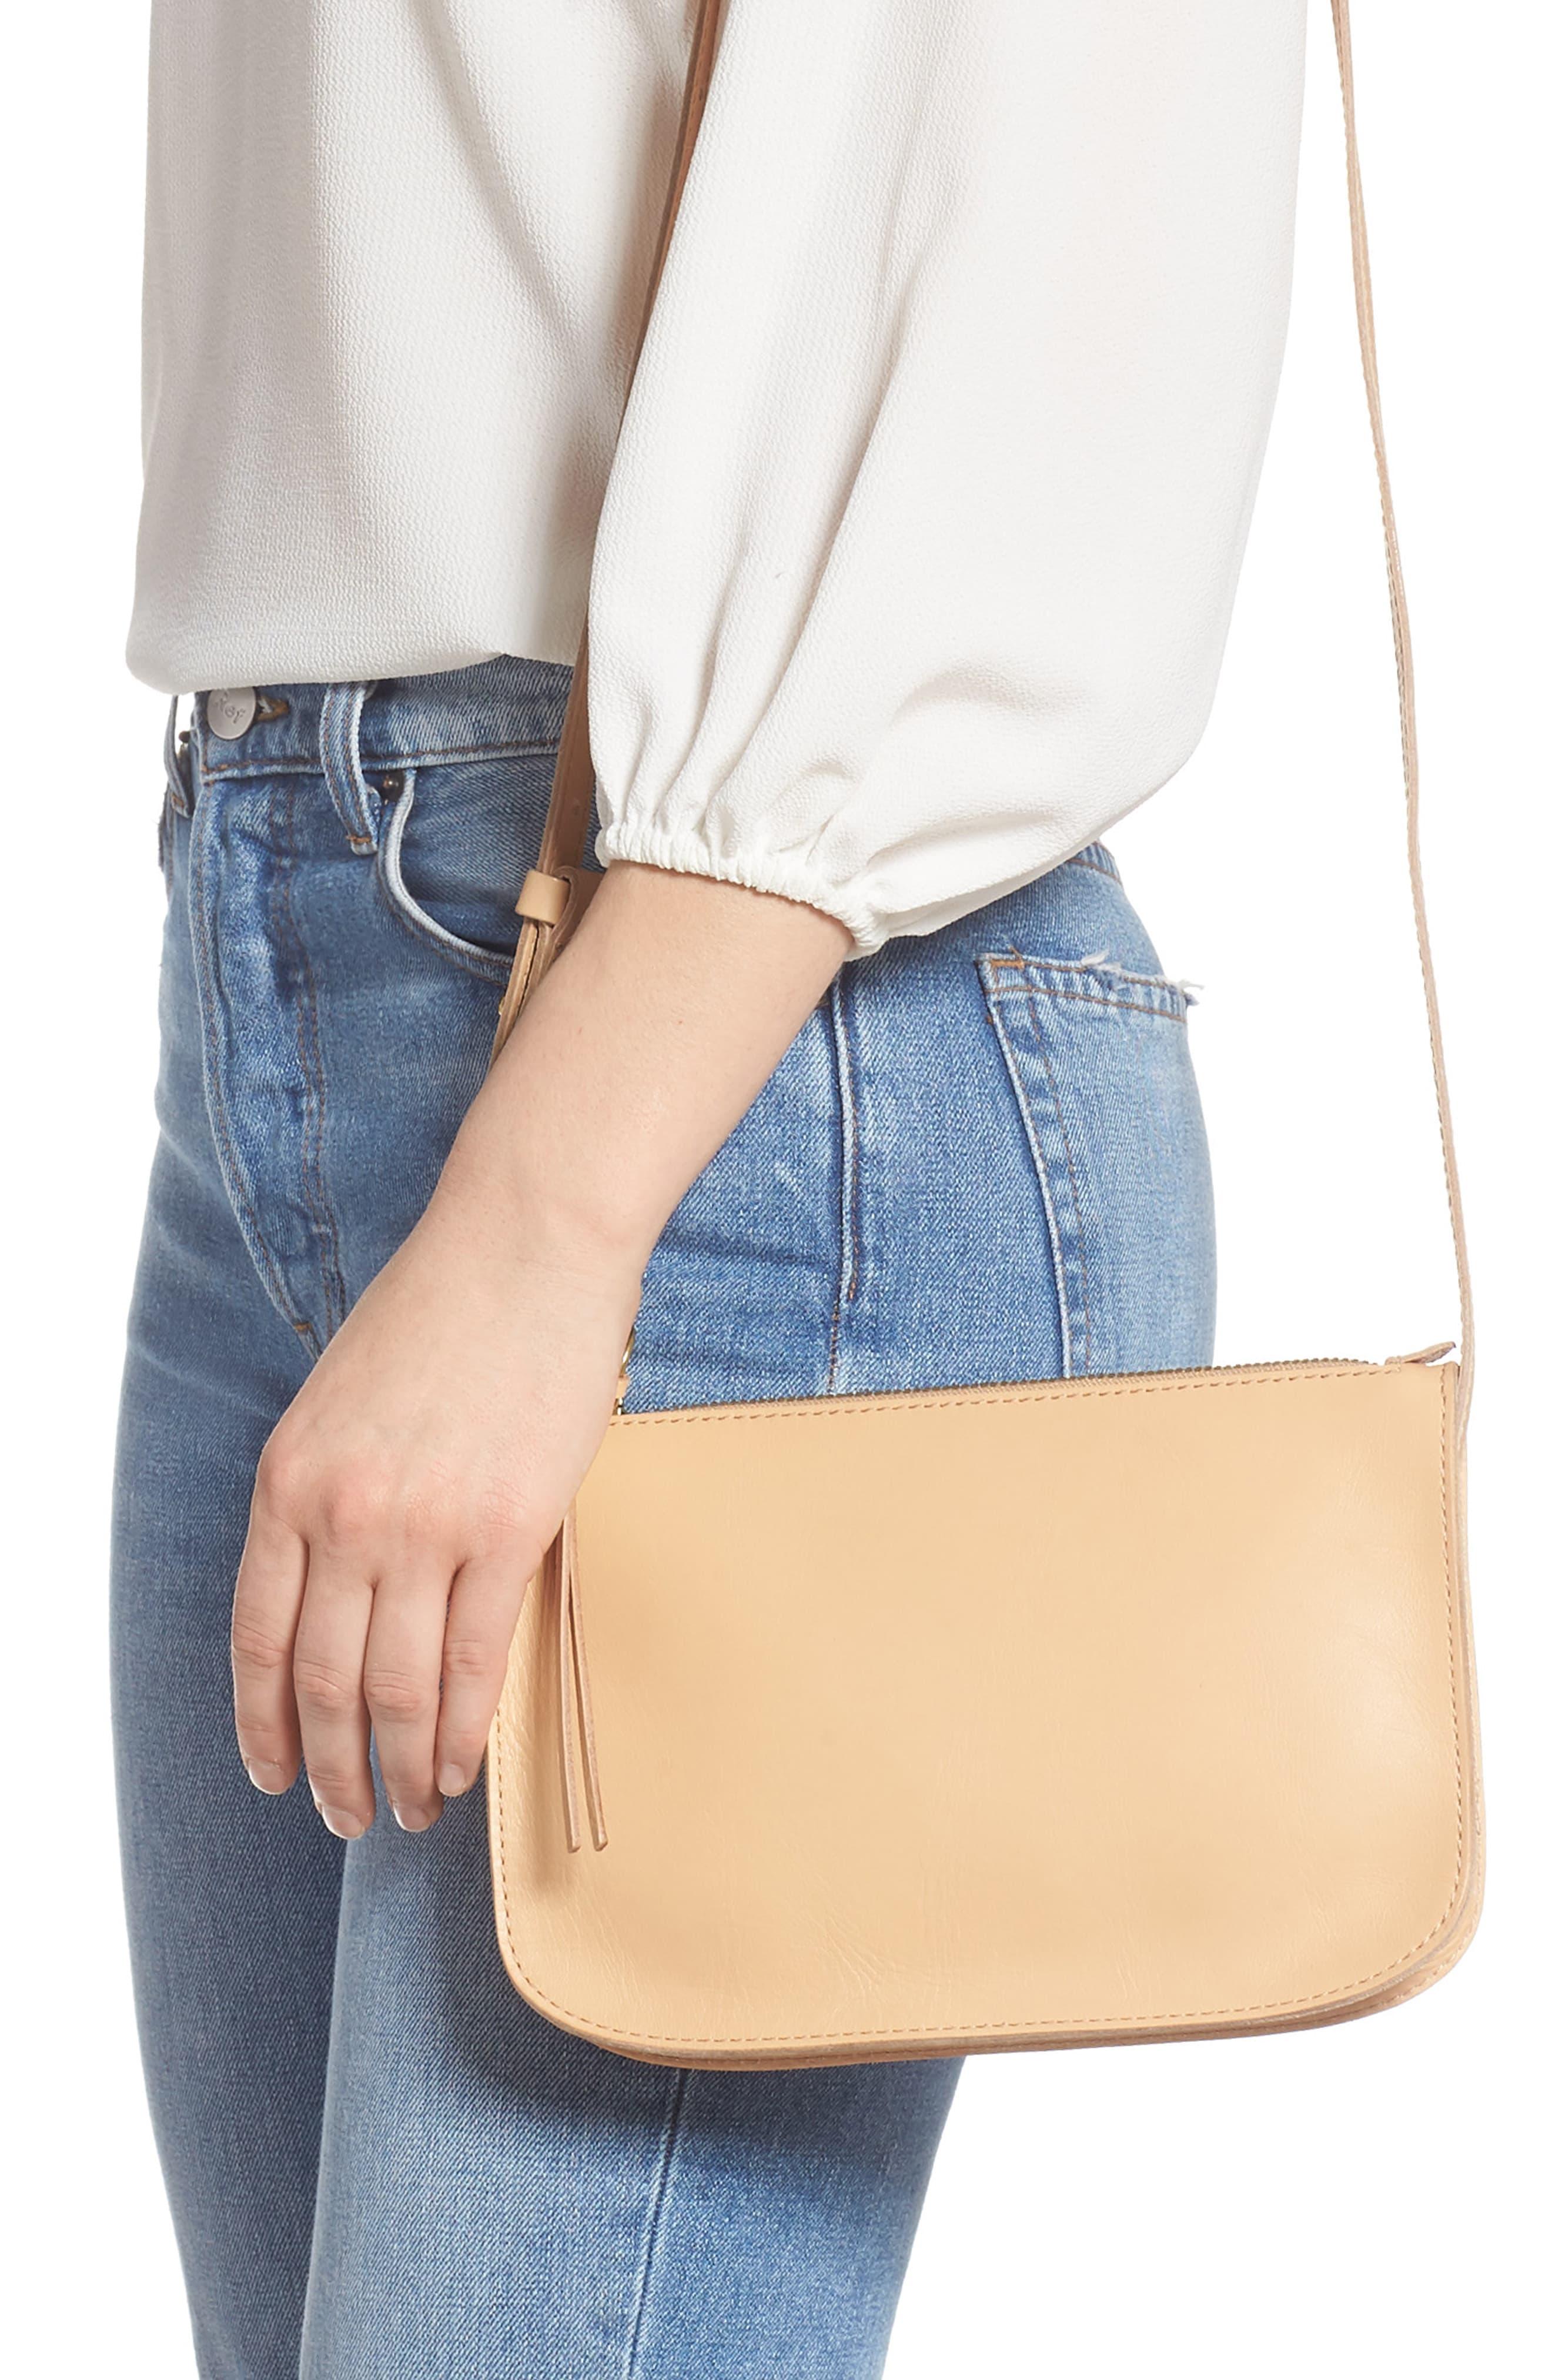 Madewell The Simple Leather Crossbody Bag in Brown - Lyst